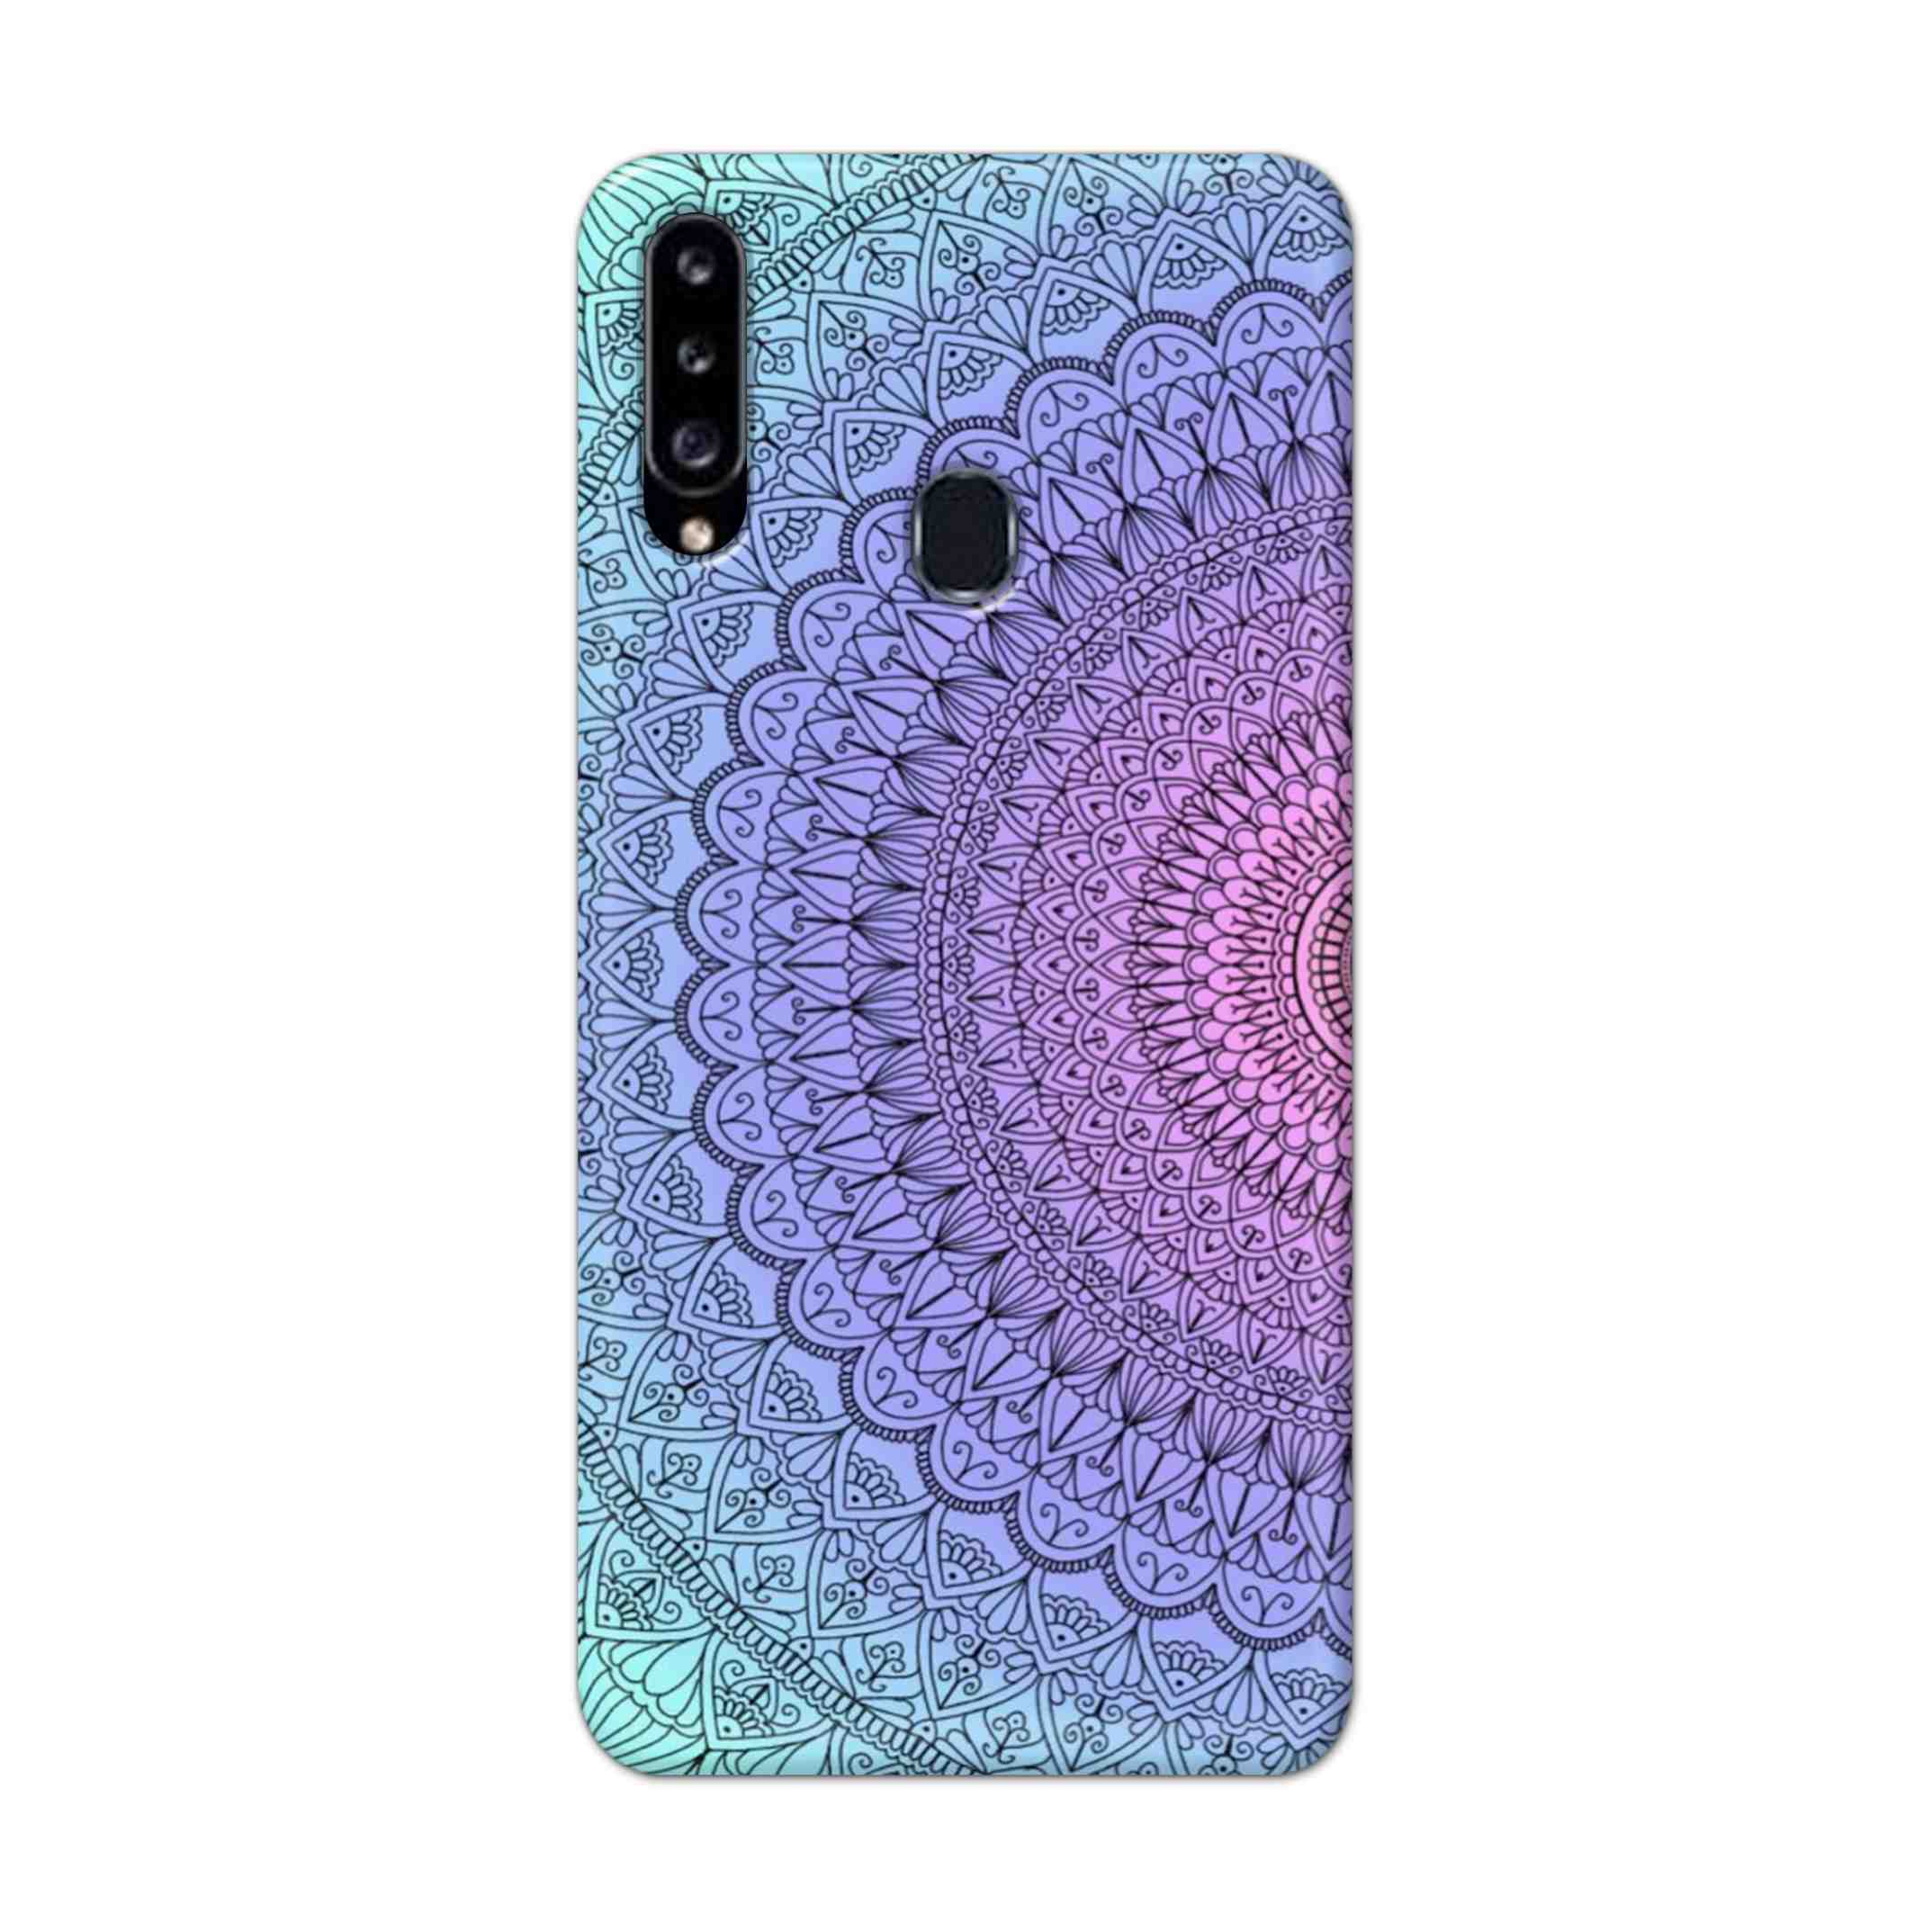 Buy Colourful Mandala Hard Back Mobile Phone Case Cover For Samsung Galaxy A21 Online